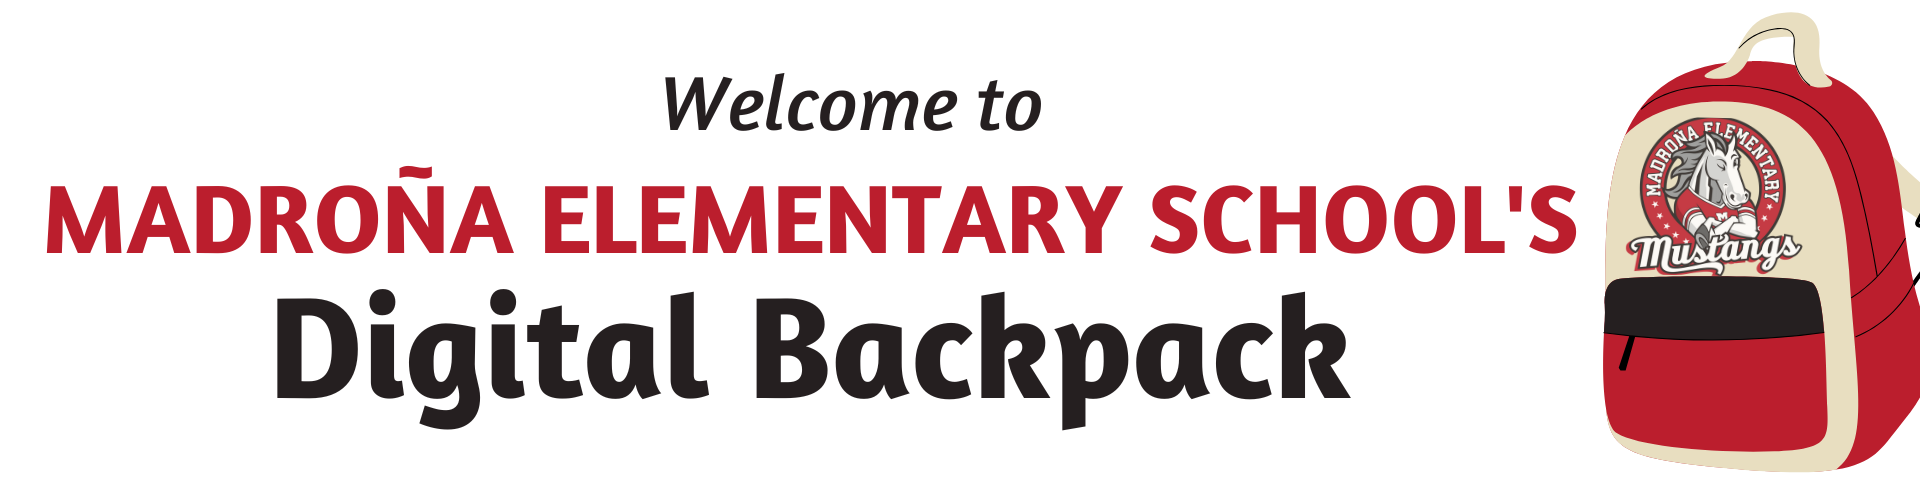 Welcome to Madrona Elementary School's Digital Backpack